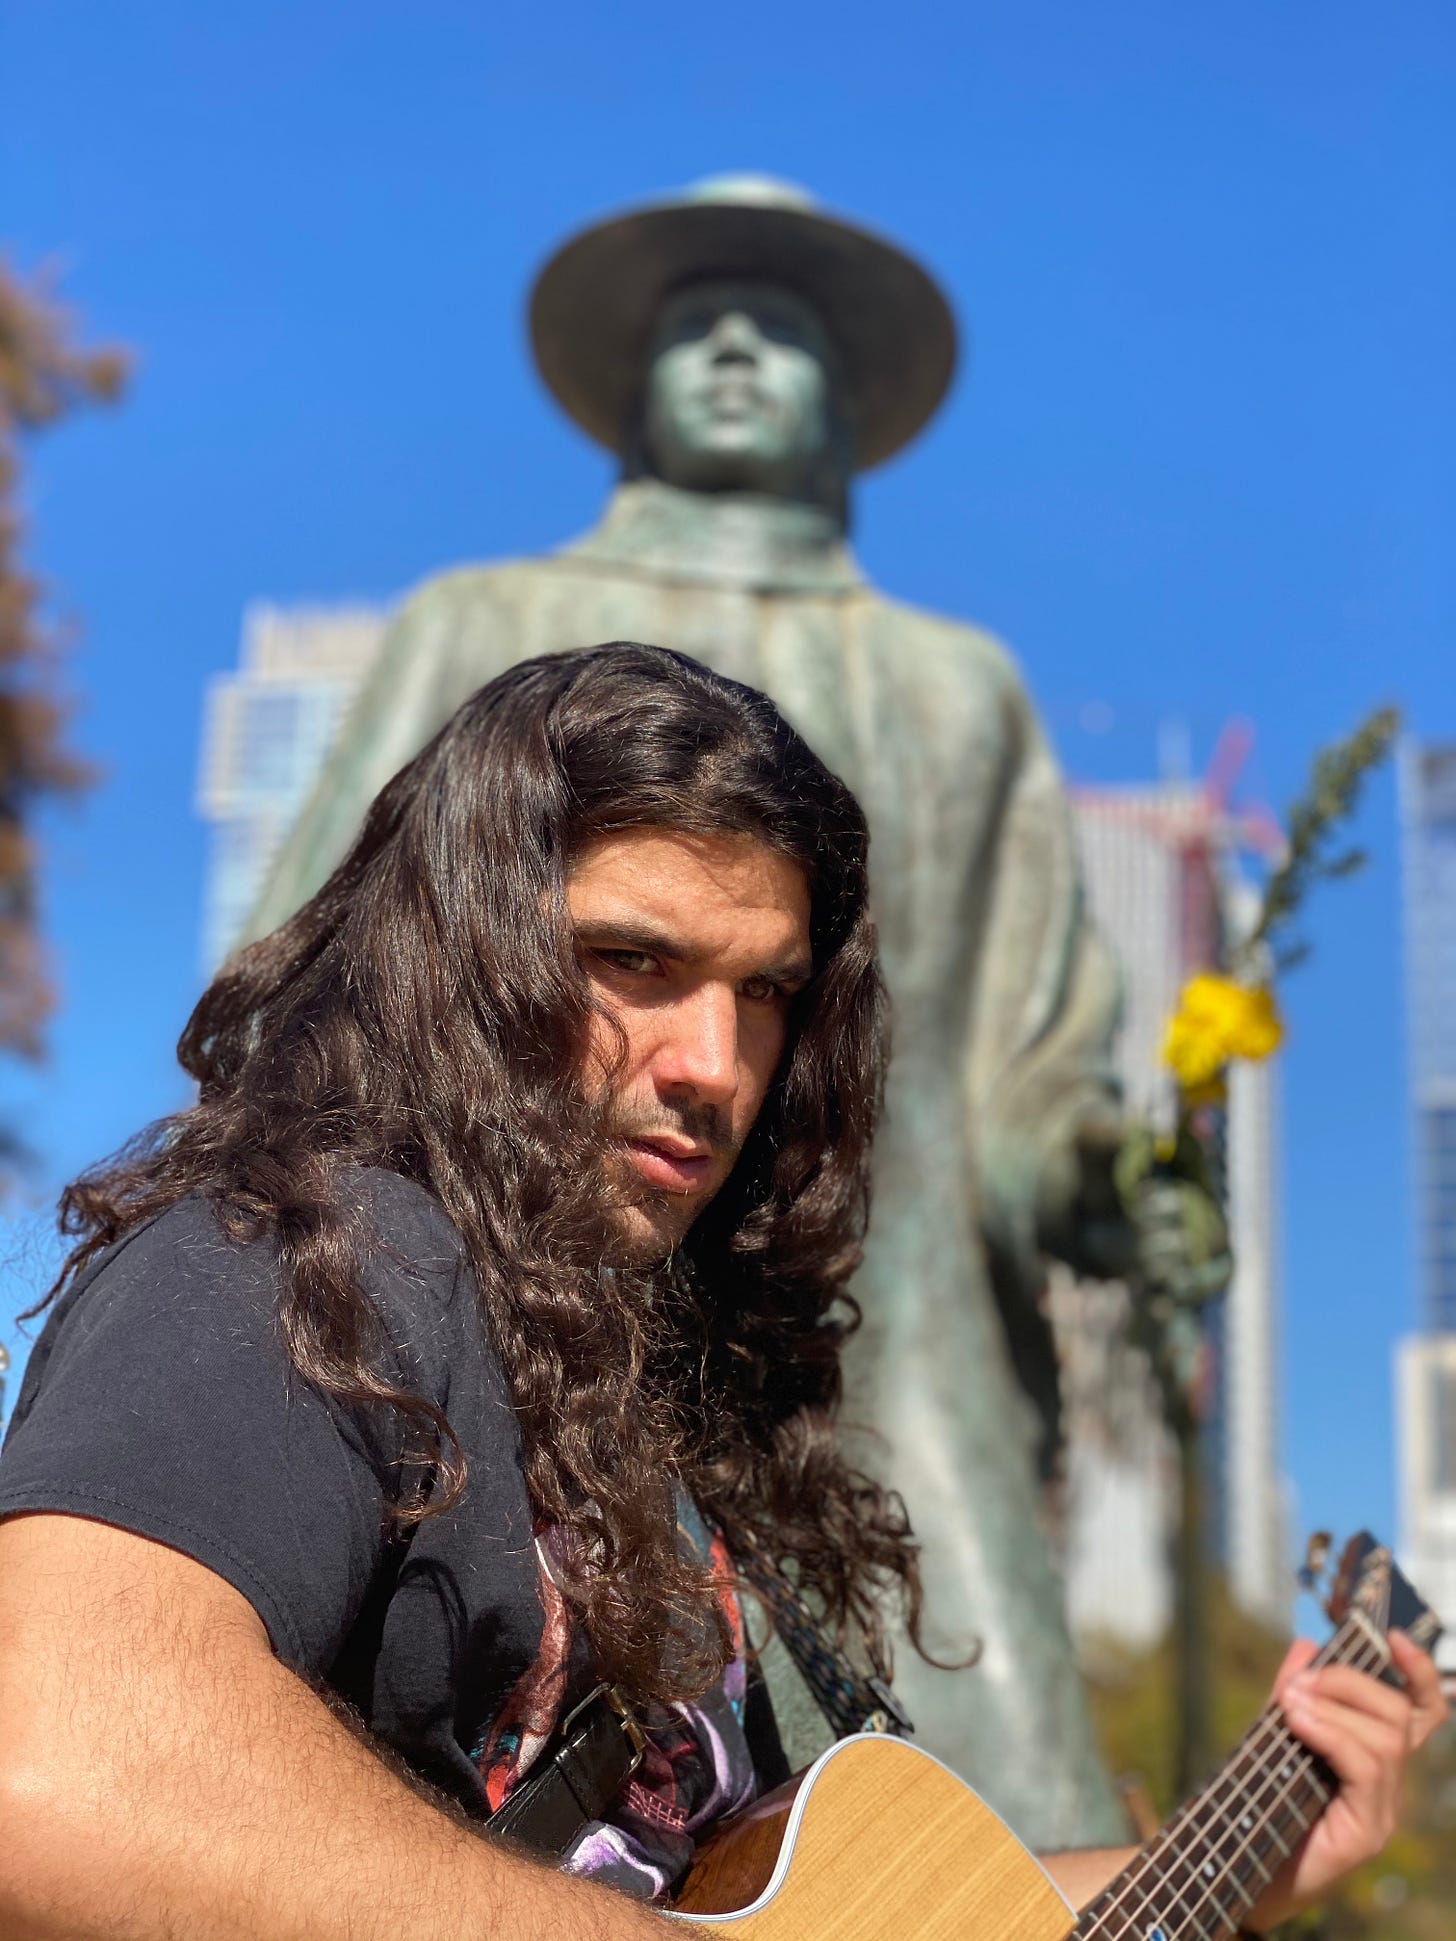 anthony standing so serious with his hear down and shining so beautifully and statue of stevie ray vaughn is behind his head blurred out